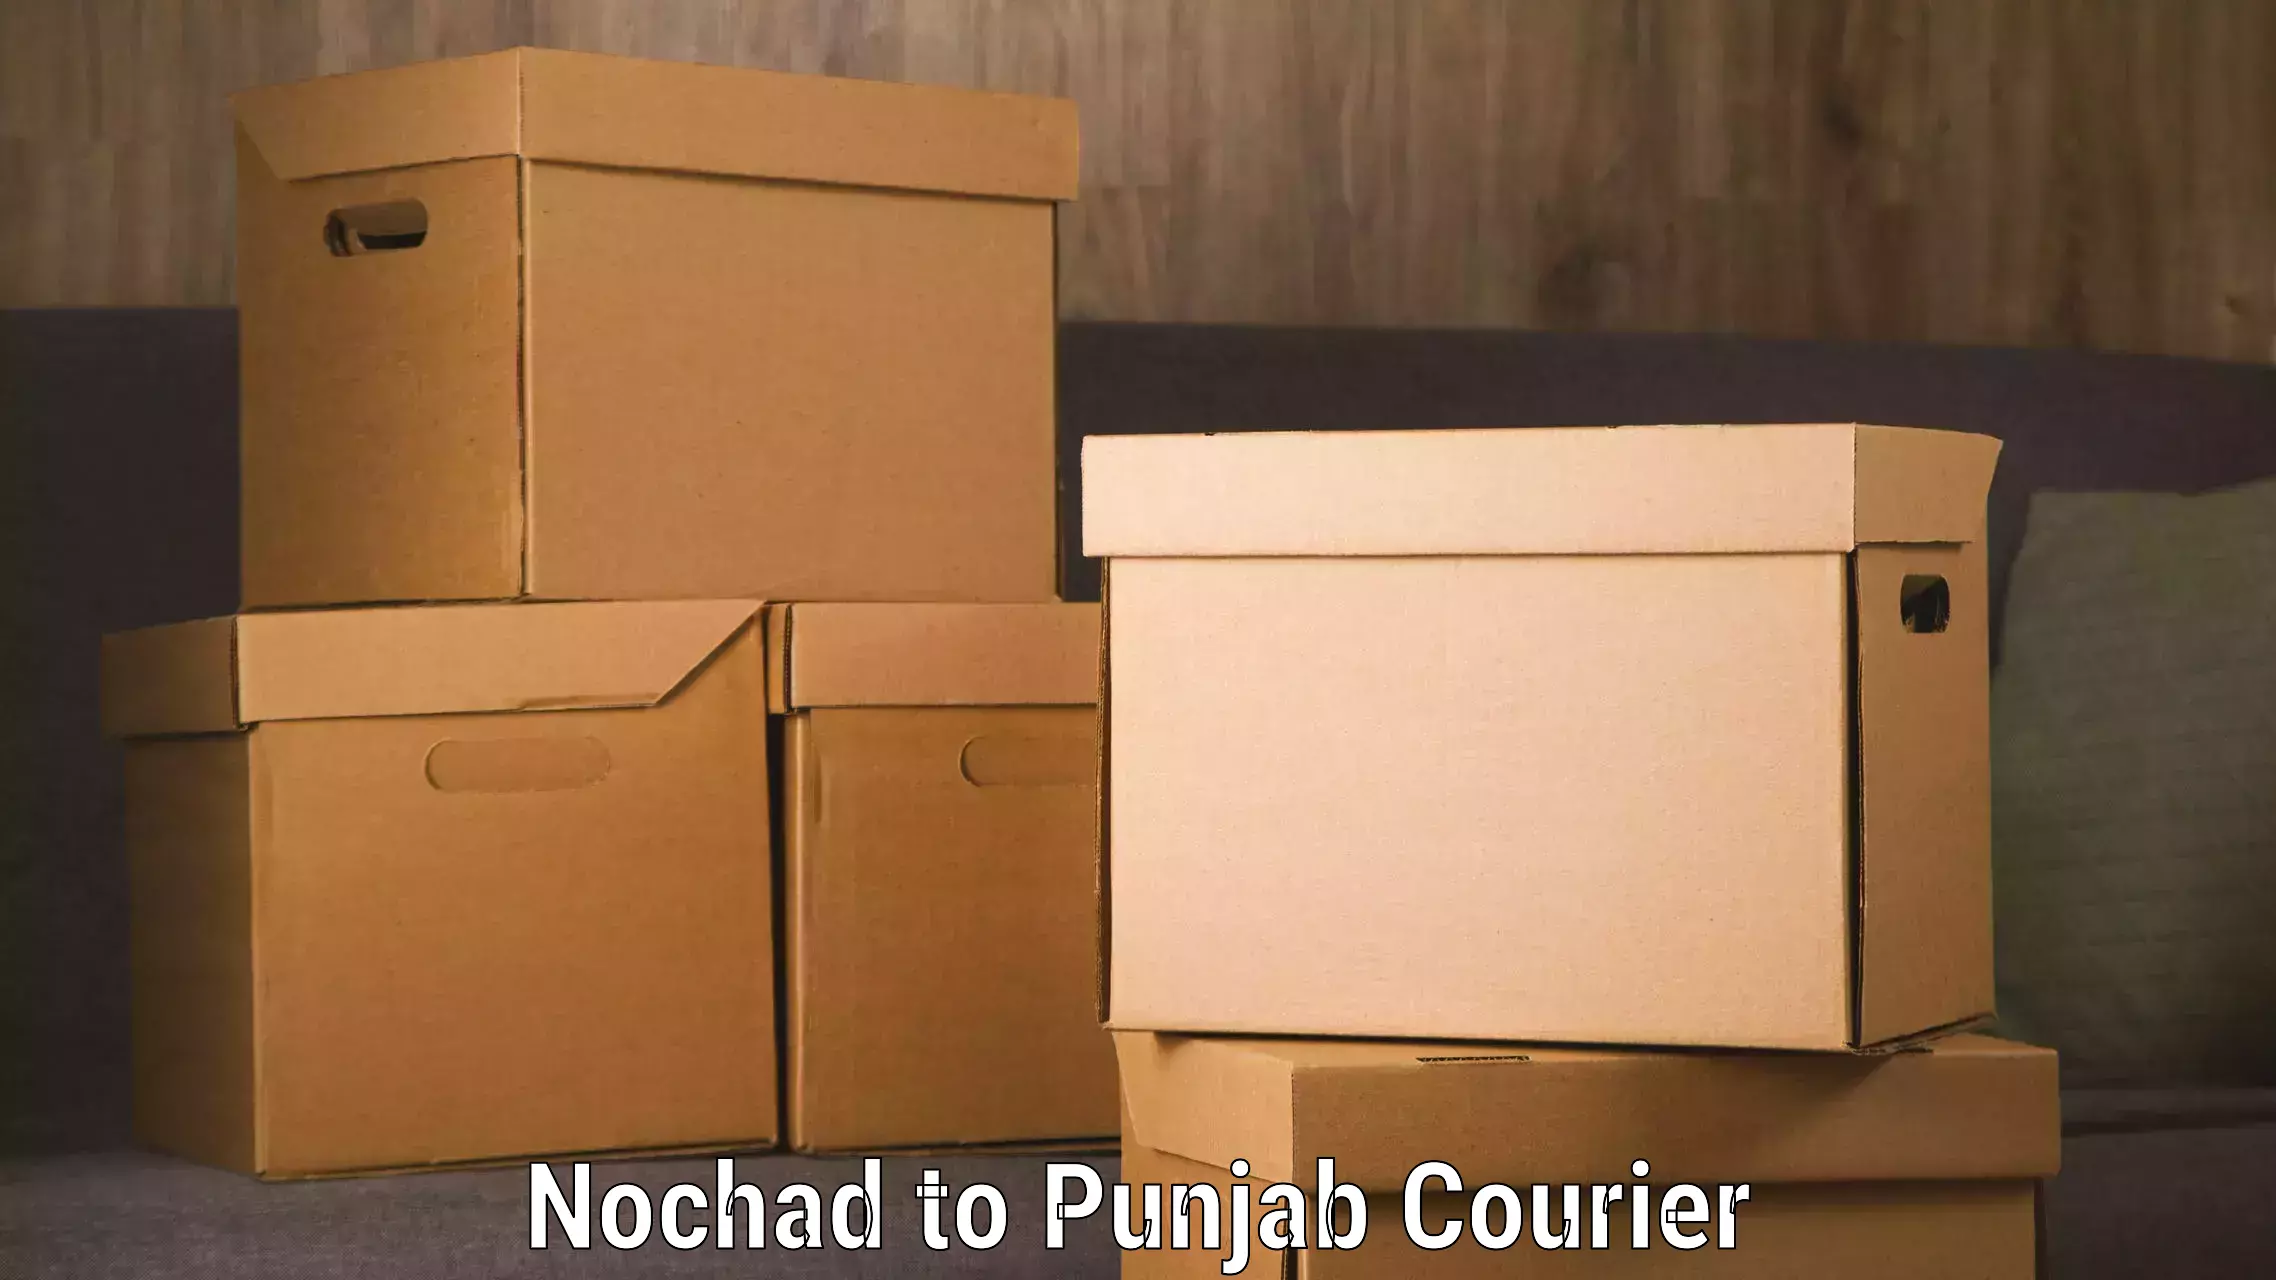 Heavy parcel delivery in Nochad to Punjab